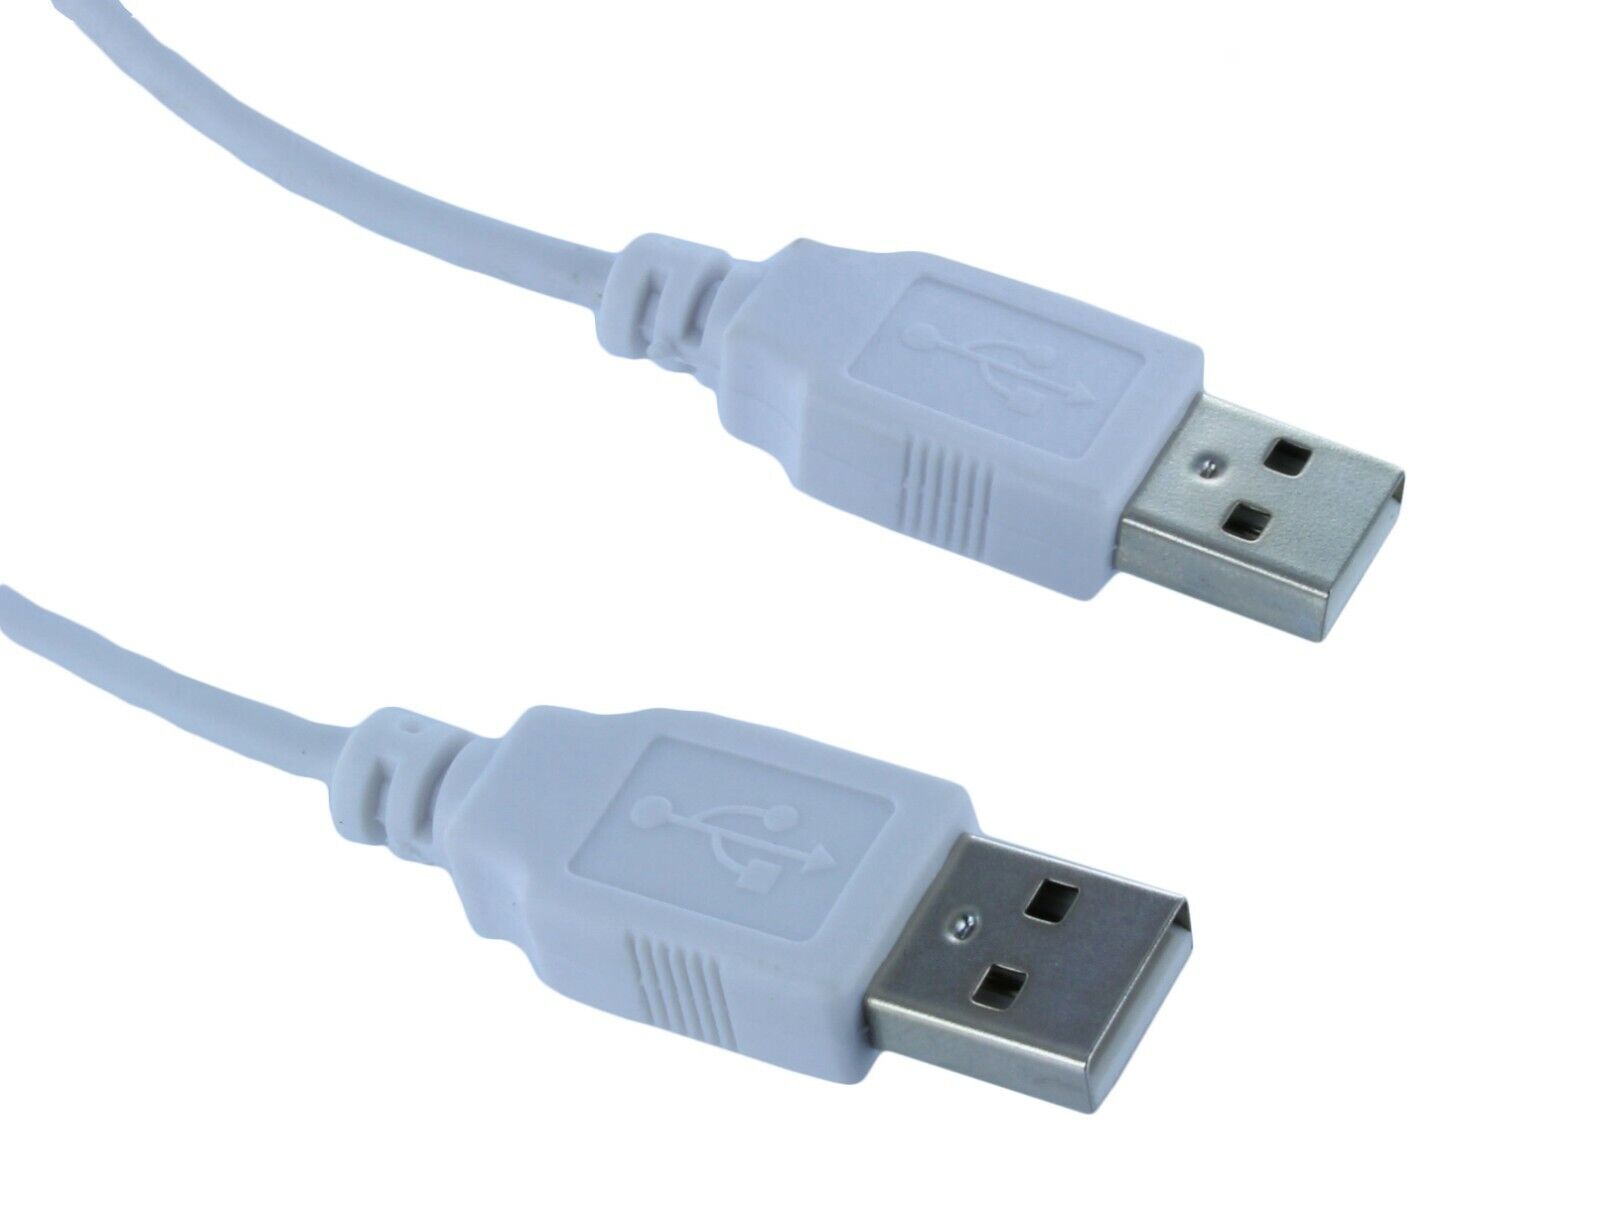 3 Pack 6Ft 6FEET USB2.0 Type A Male to Type A Male Cable Cord (U2A1-A1-06-3PK)